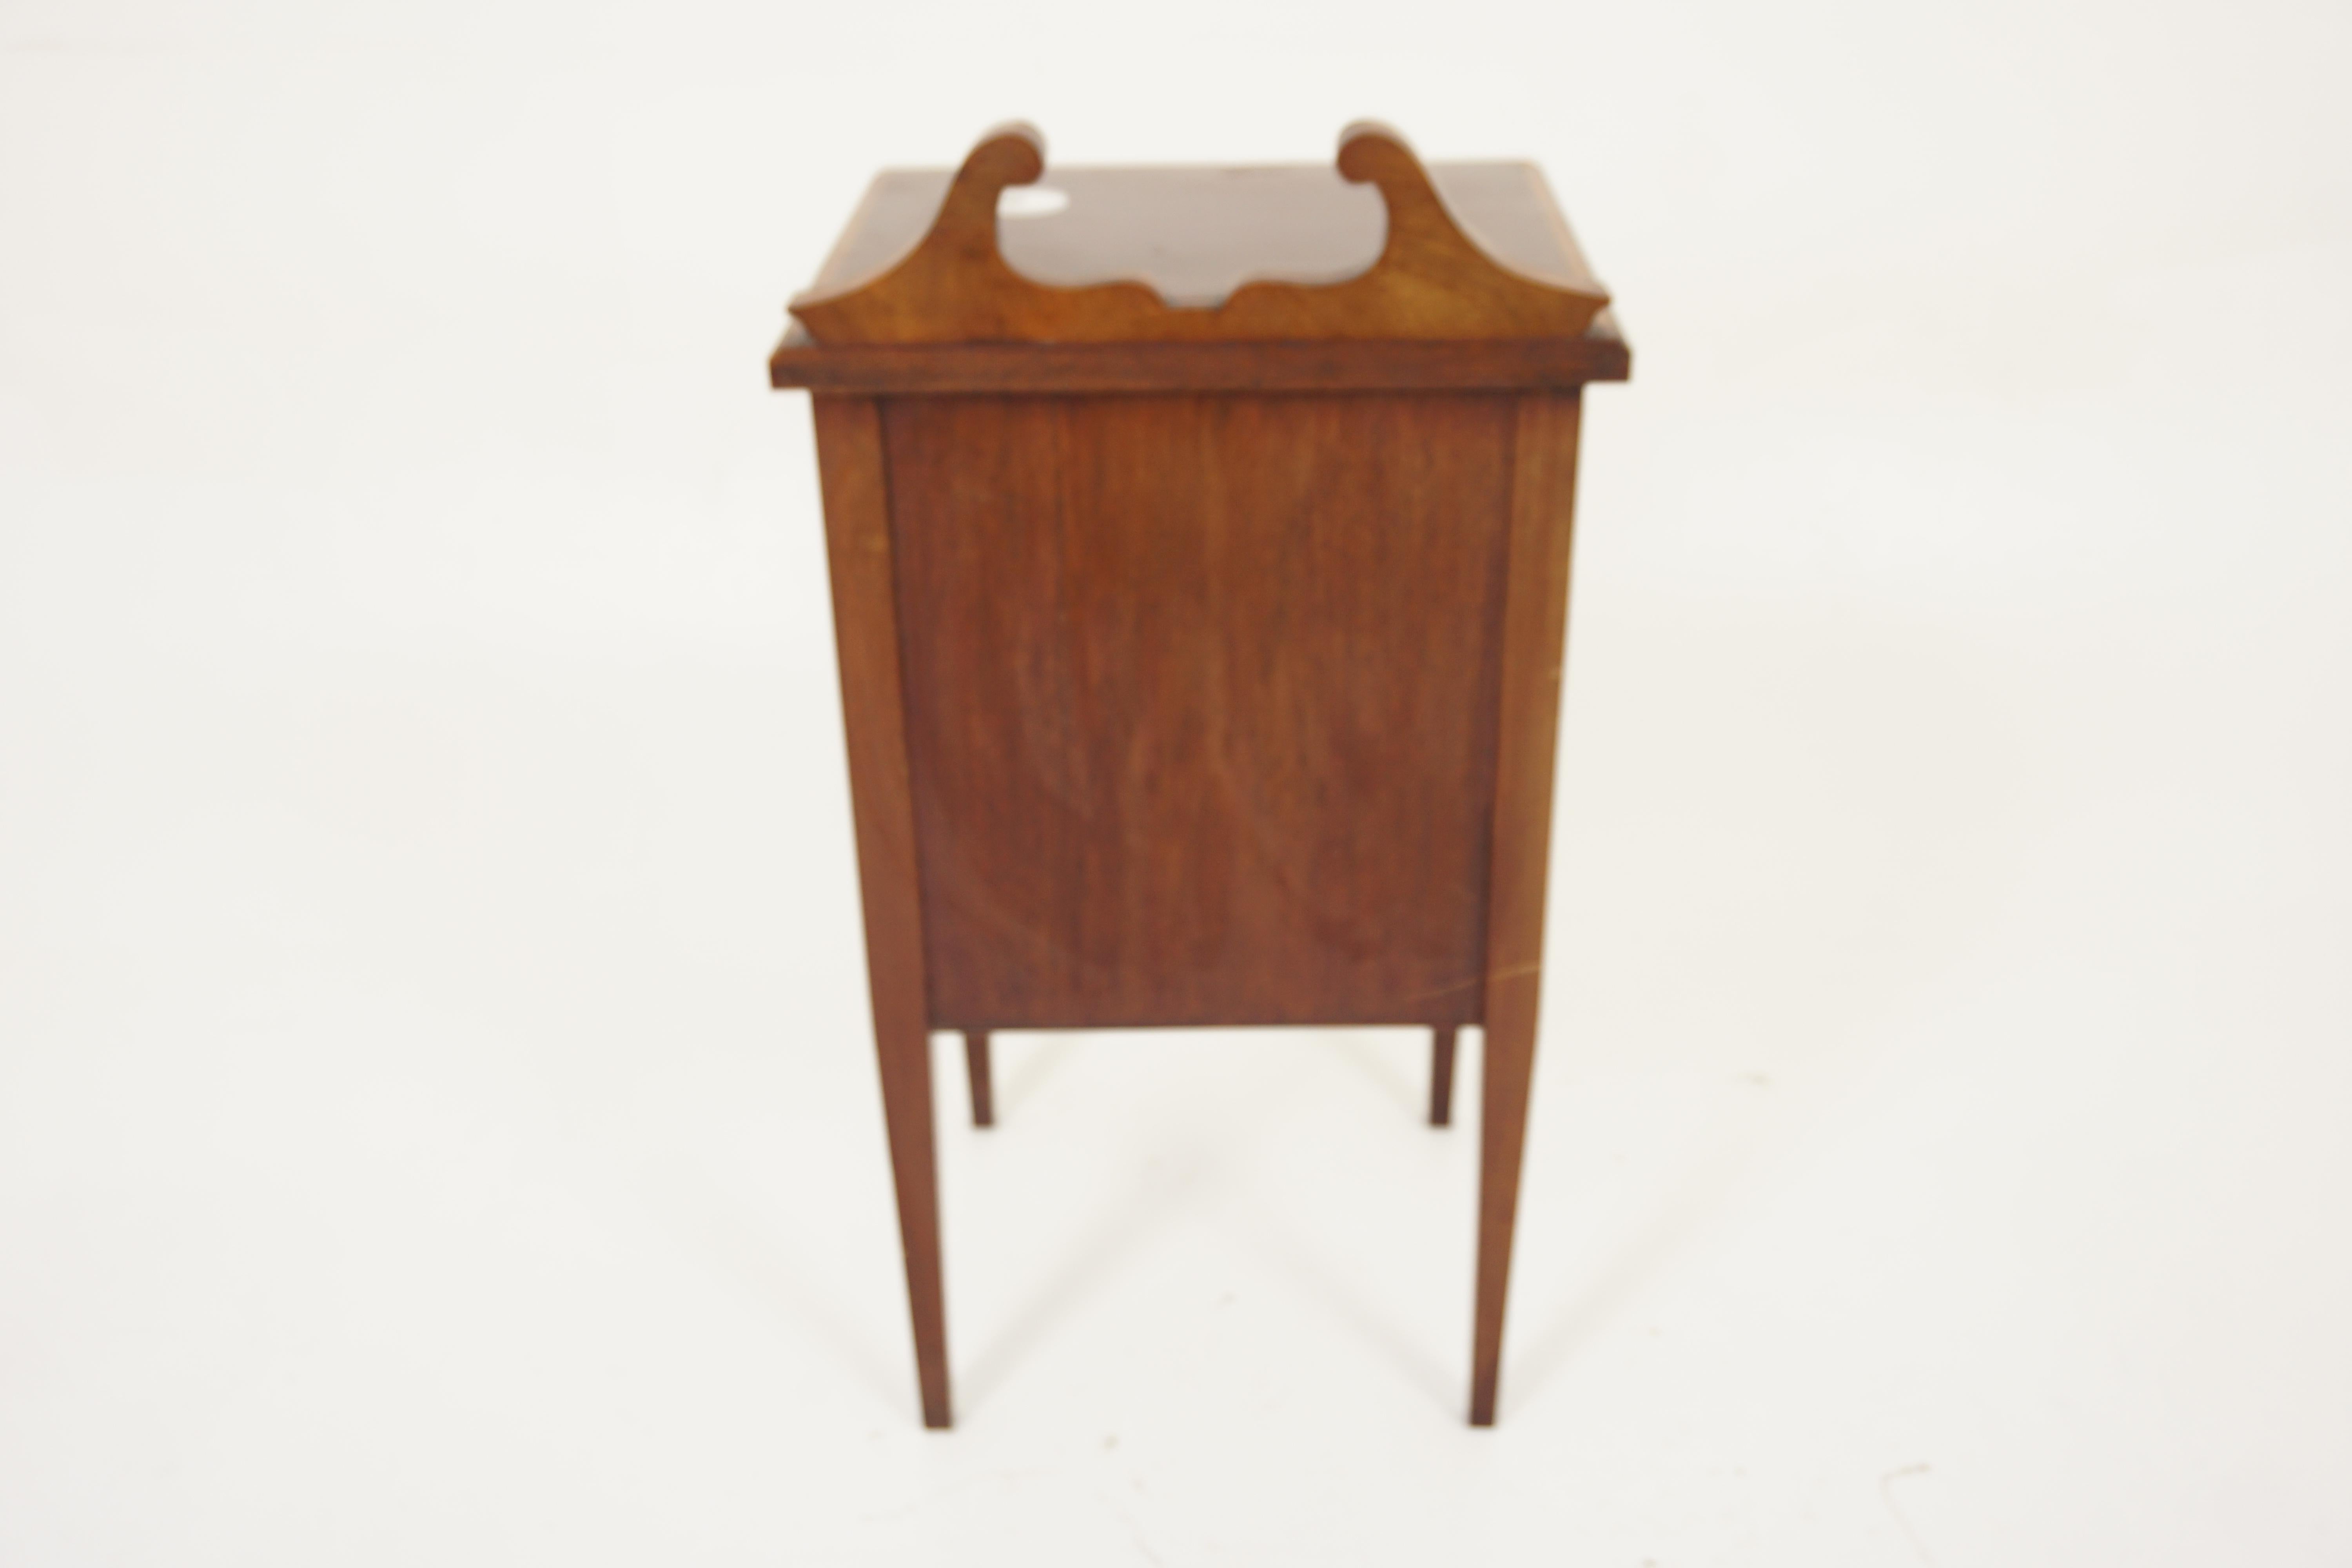 Antique Walnut Nightstand, Inlaid Walnut Bedside Table, Scotland 1900, H1084 For Sale 2